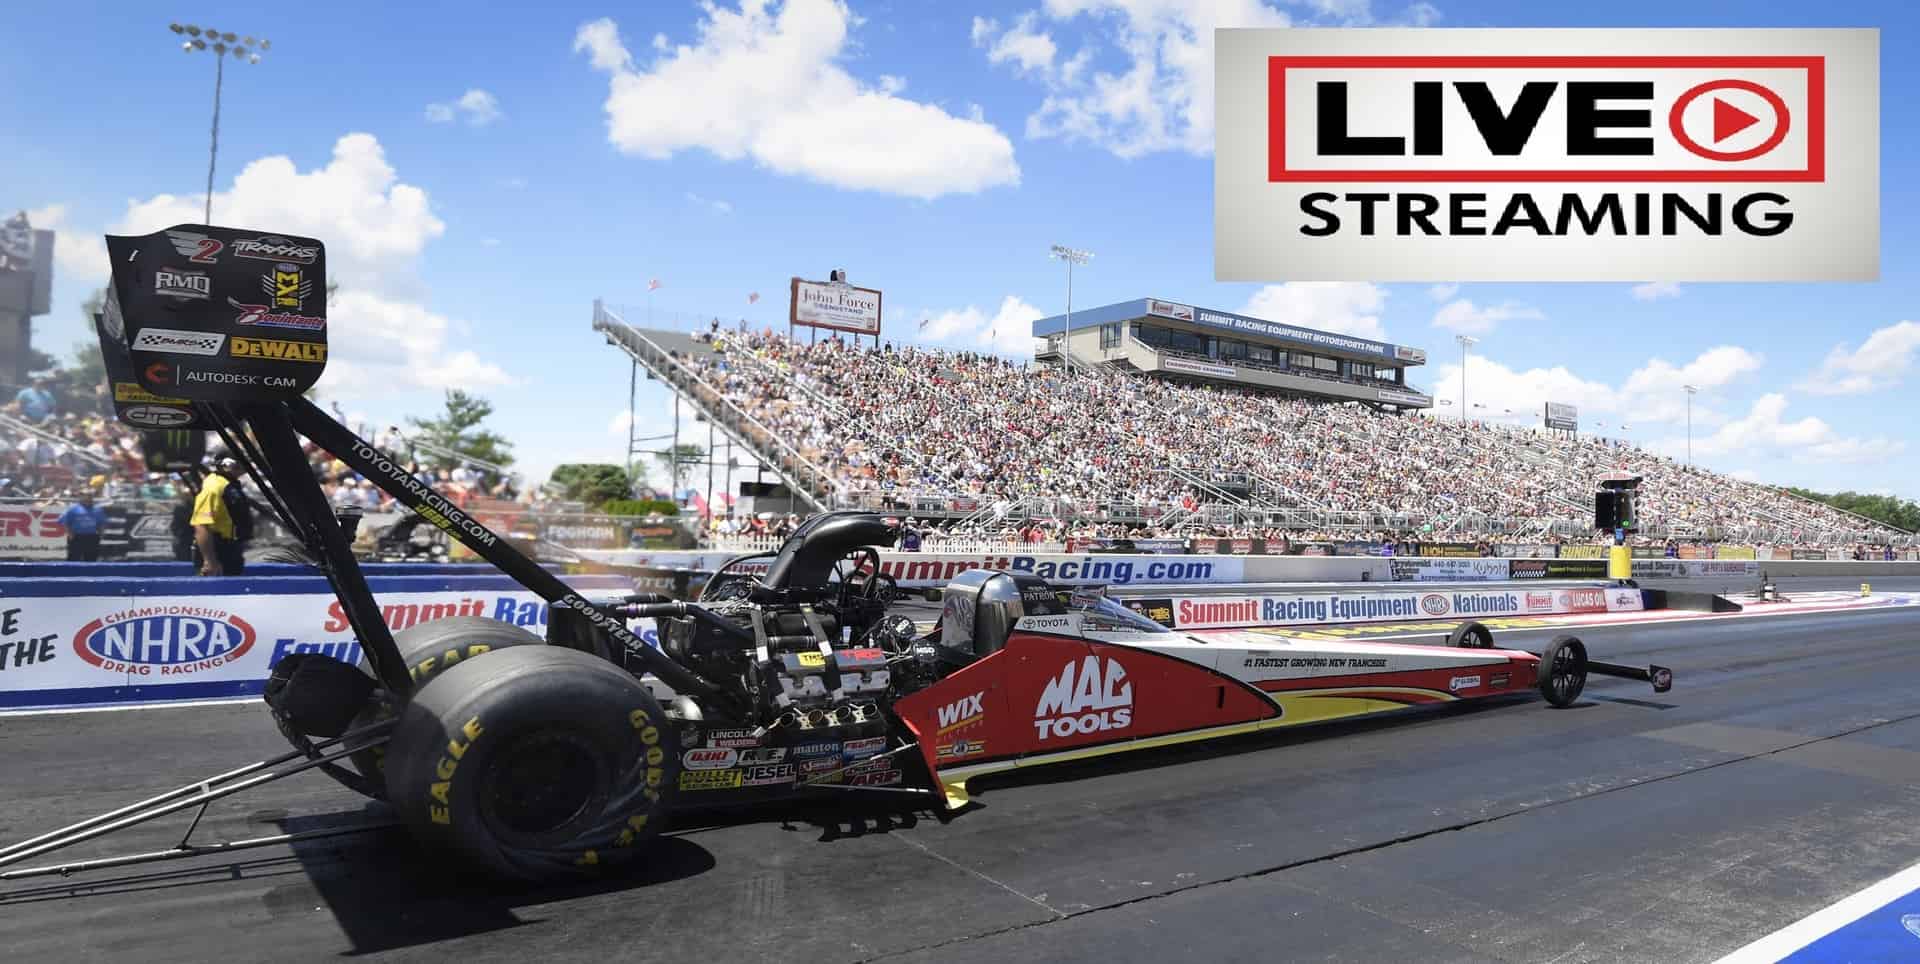 drag-race-nhra-new-england-nationals-live-streaming